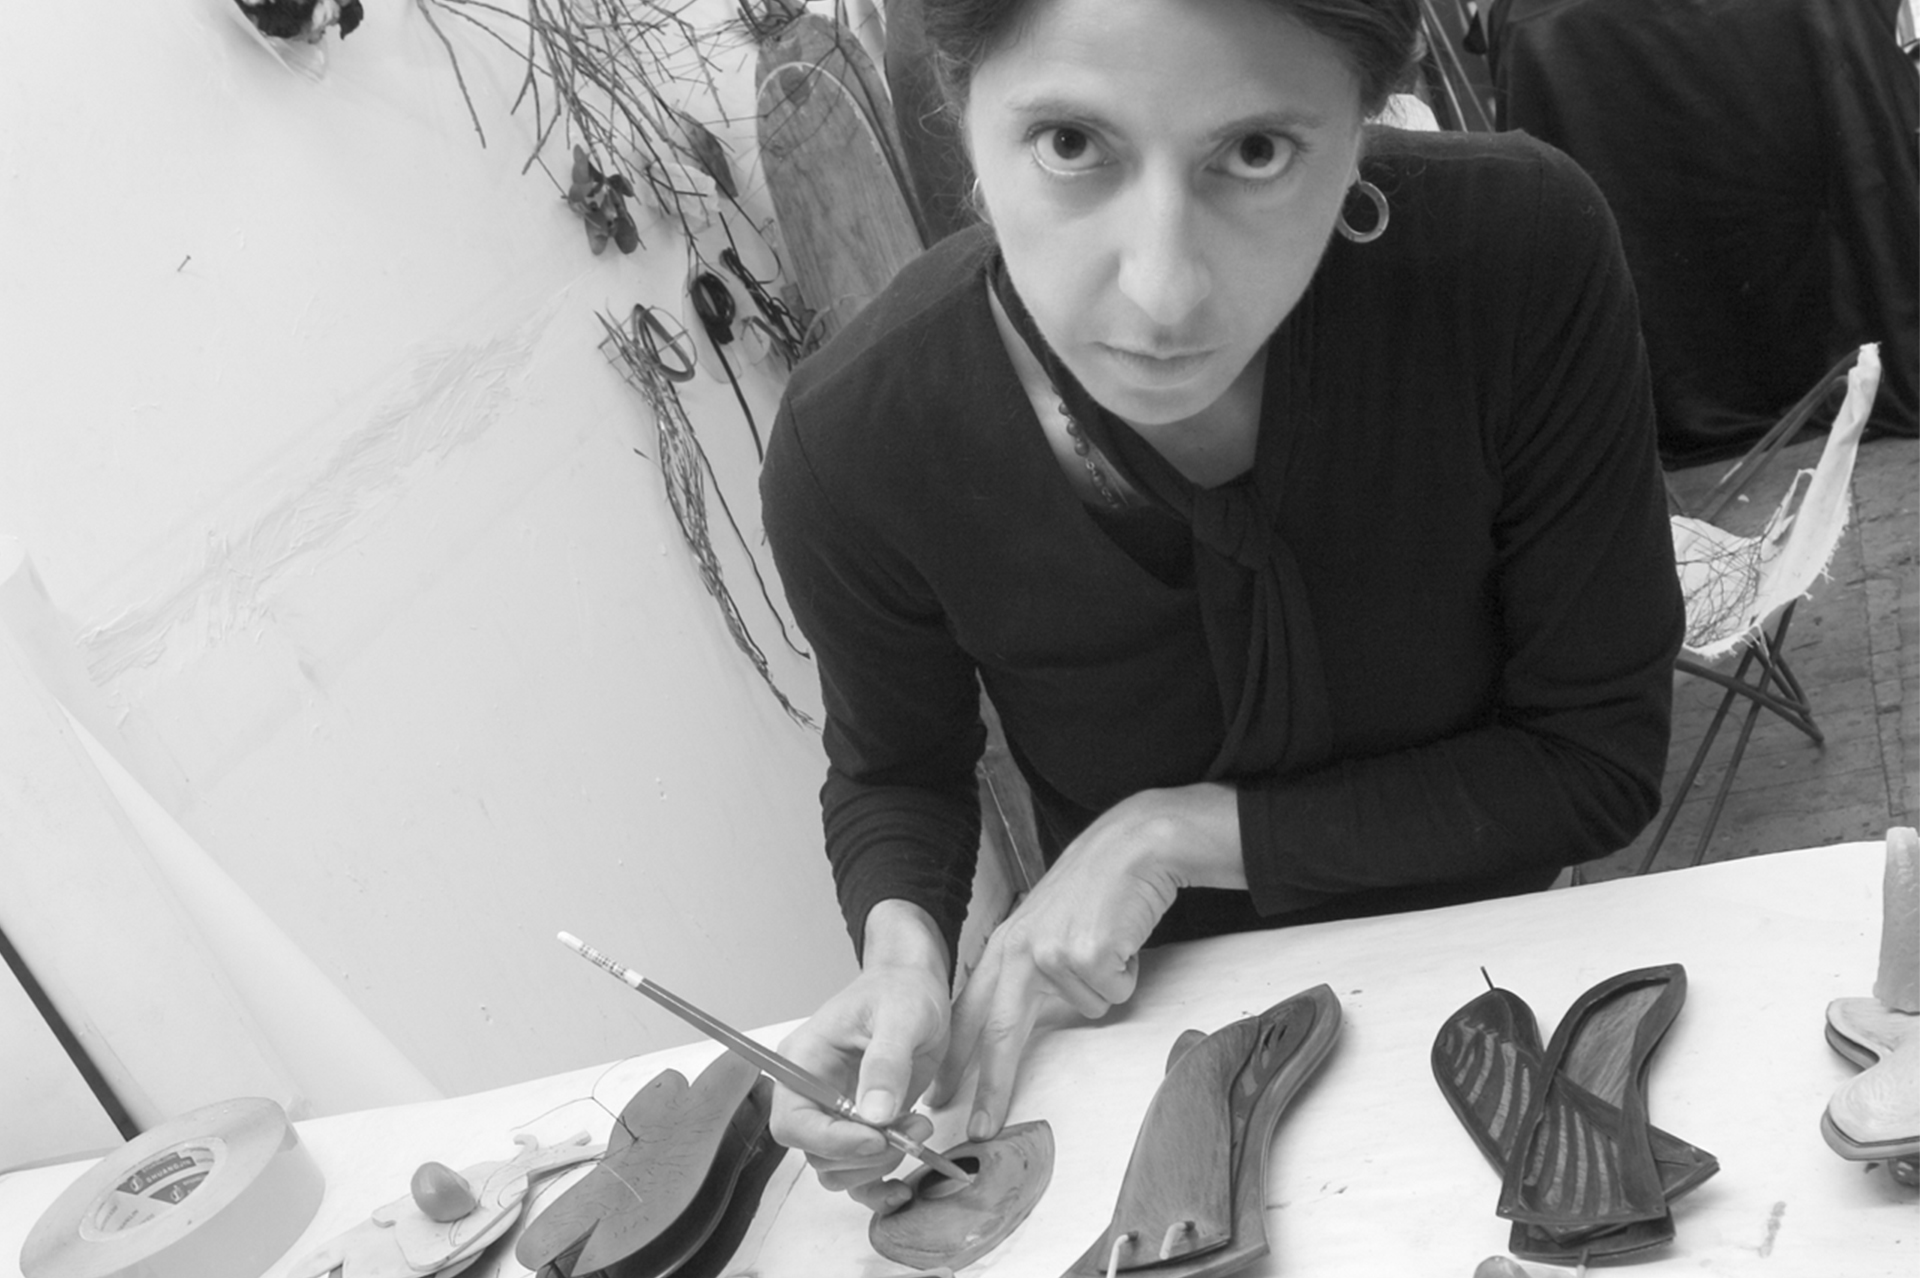 A black and white photograph of a woman at a work bench with a small tool in her hand. She is wearing a dark jumper and is looking intensely at the camera.